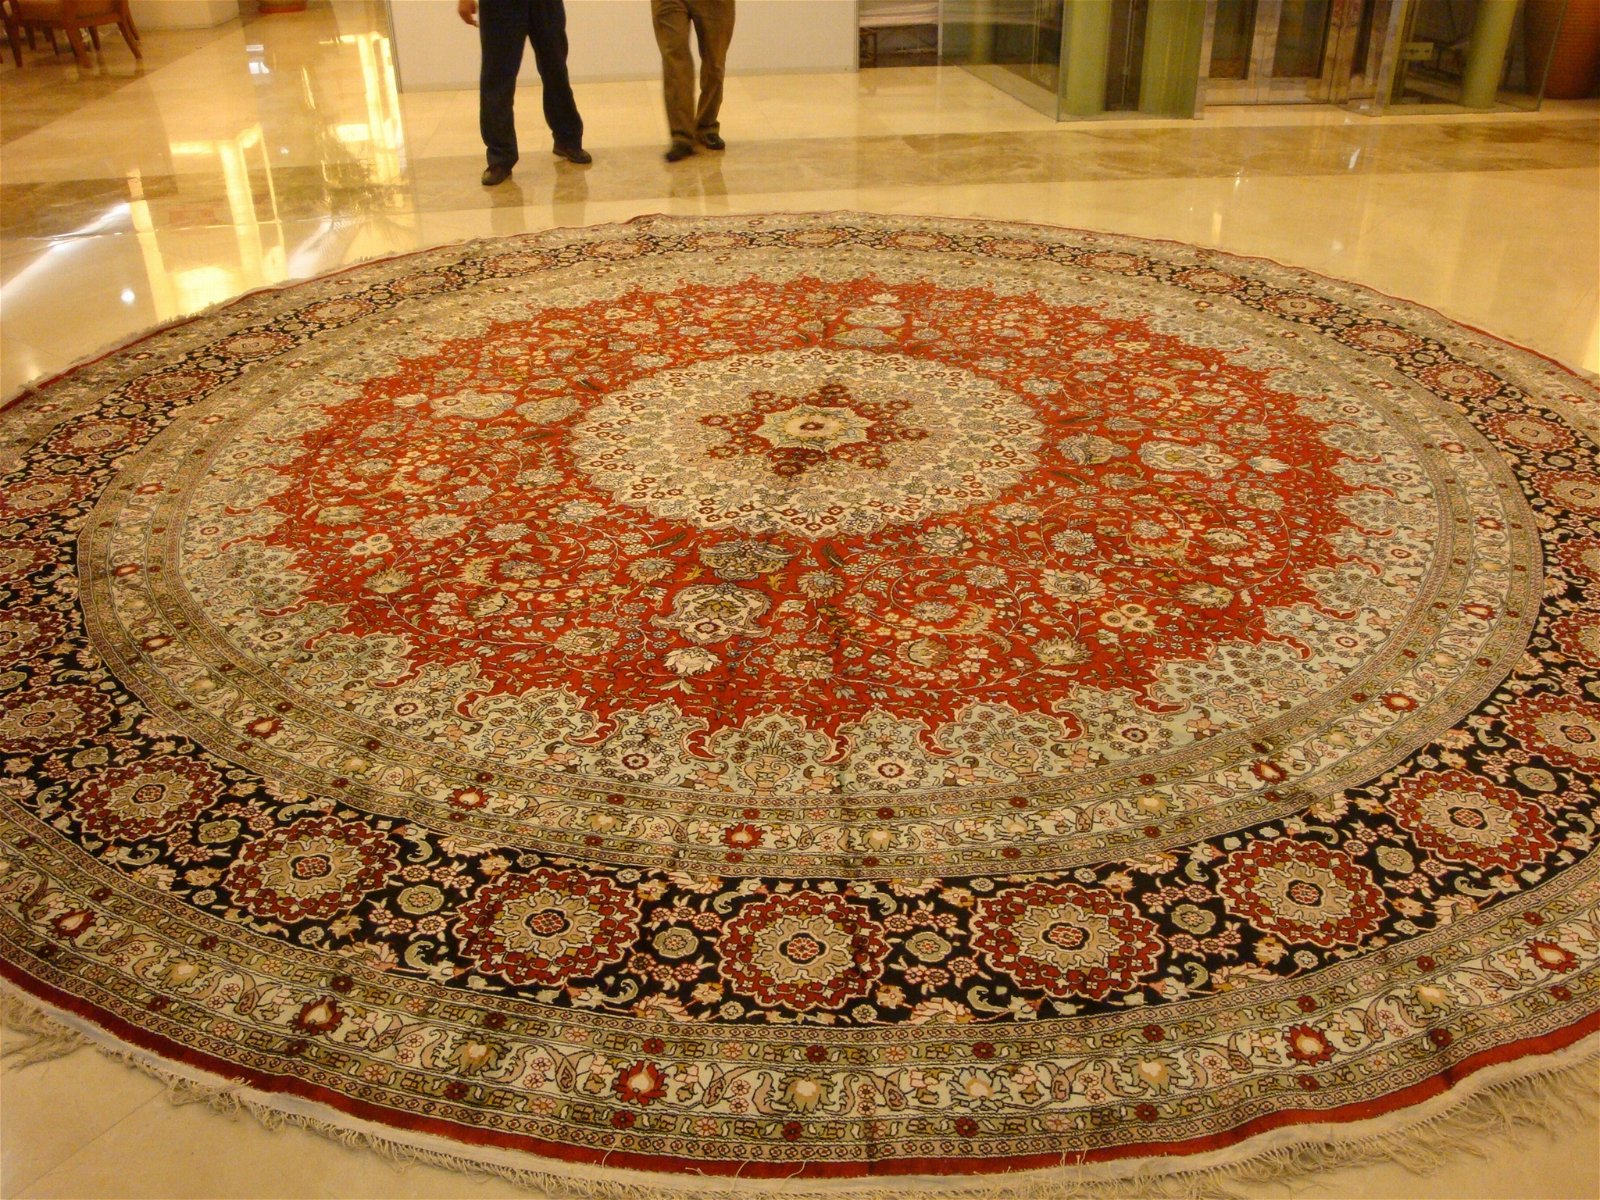 Up! Pay card plus money I want to buy a Yamei Persian garden carpet 2